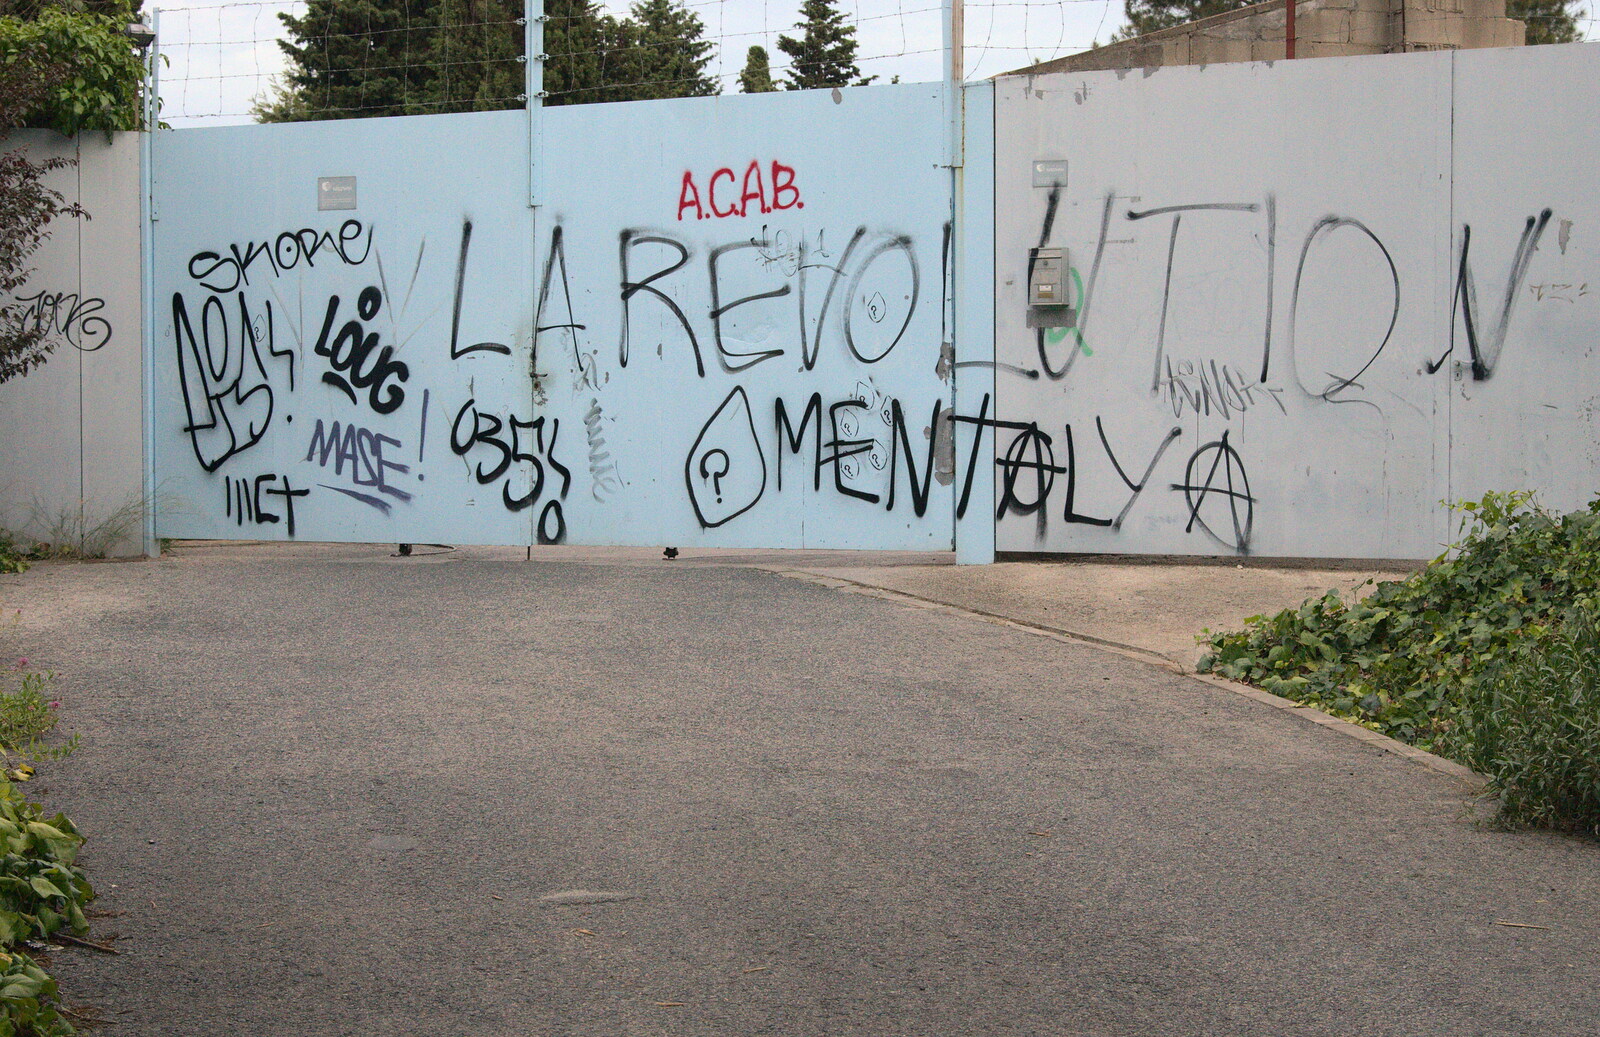 Some anarchist graffiti from The Open Education Challenge, Barcelona, Catalonia - 13th July 2014